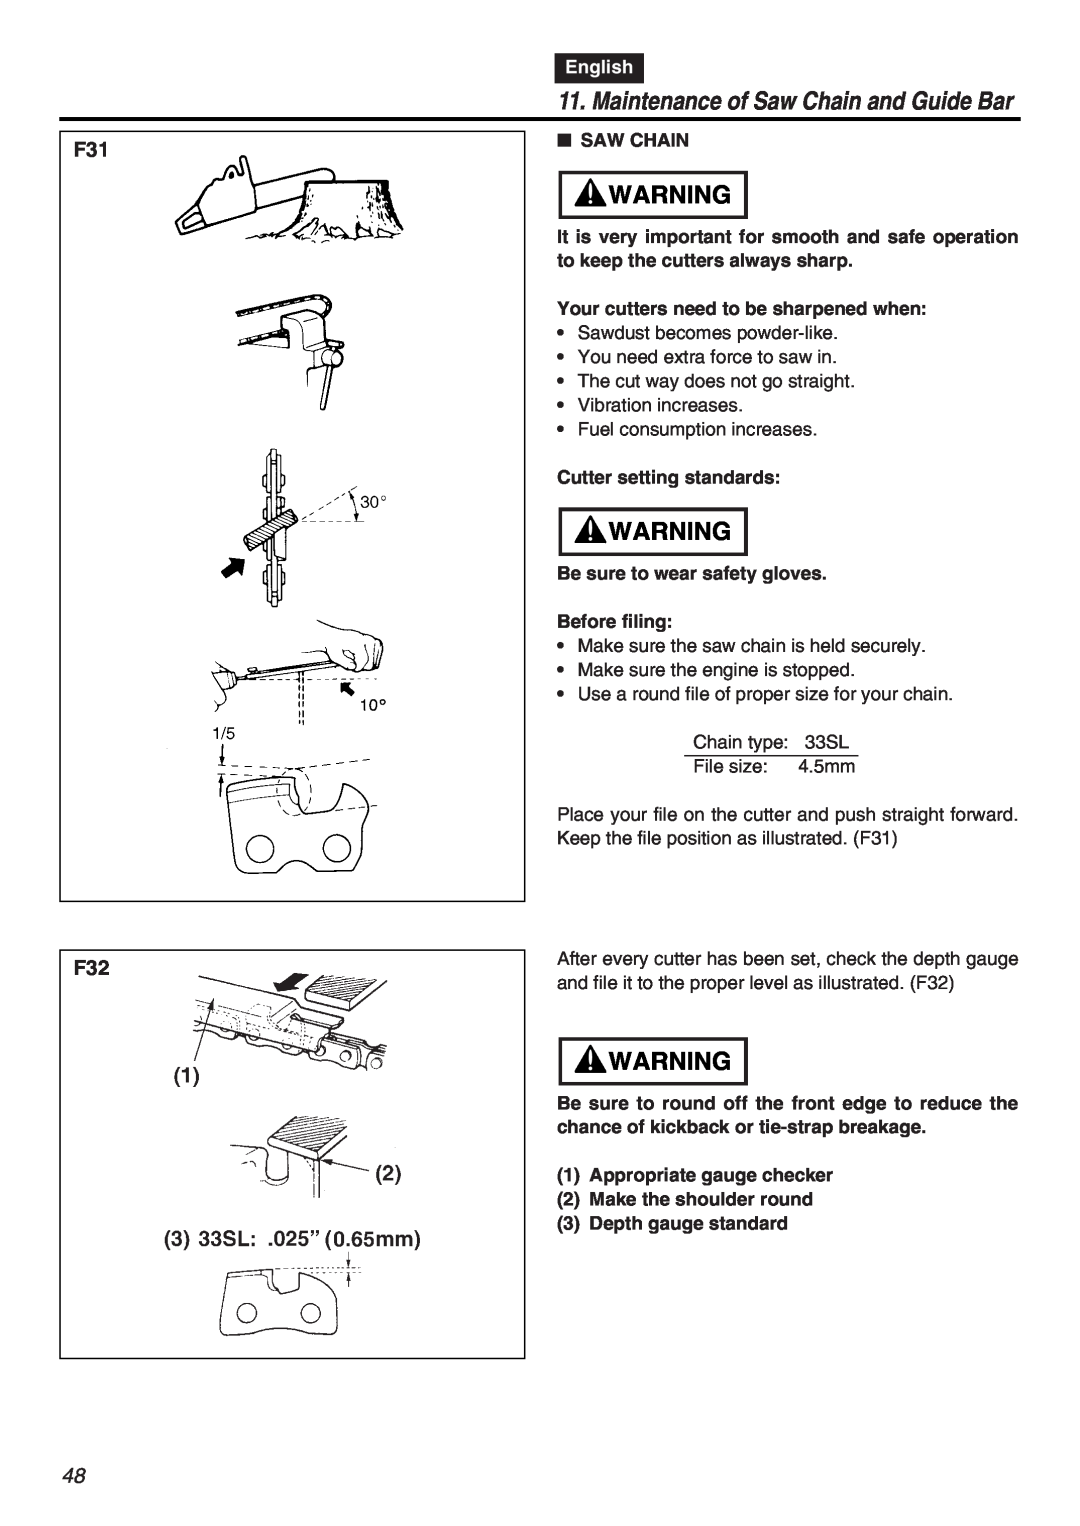 RedMax G5000AVS manual Maintenance of Saw Chain and Guide Bar, F31 F32, English 